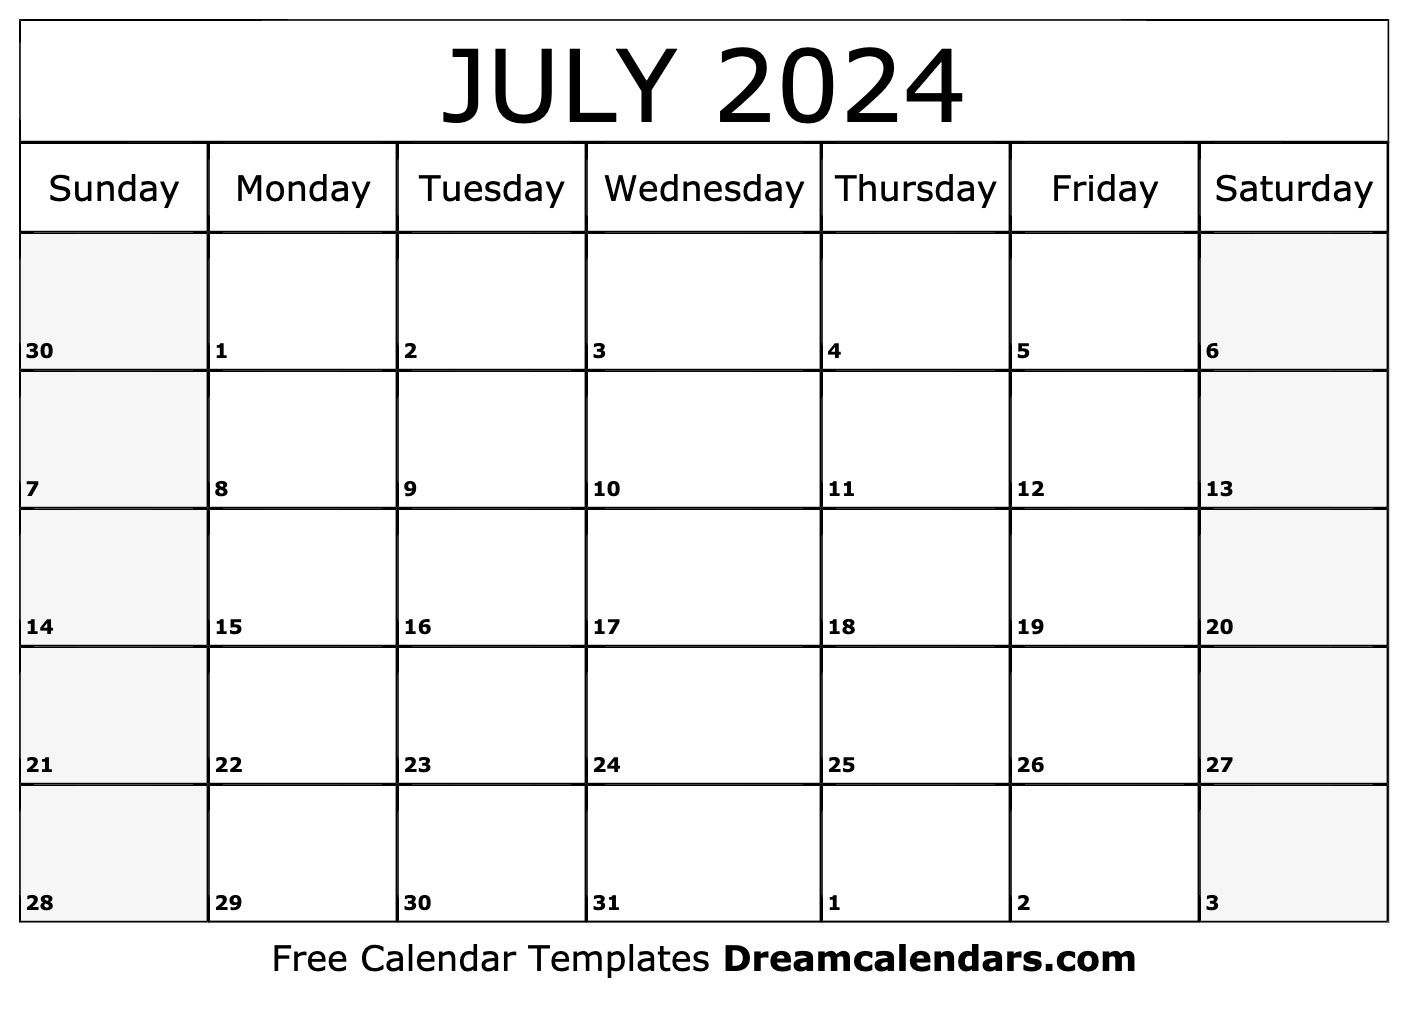 July 2024 Calendar - Free Printable With Holidays And Observances inside 21 July 2024 Calendar Printable